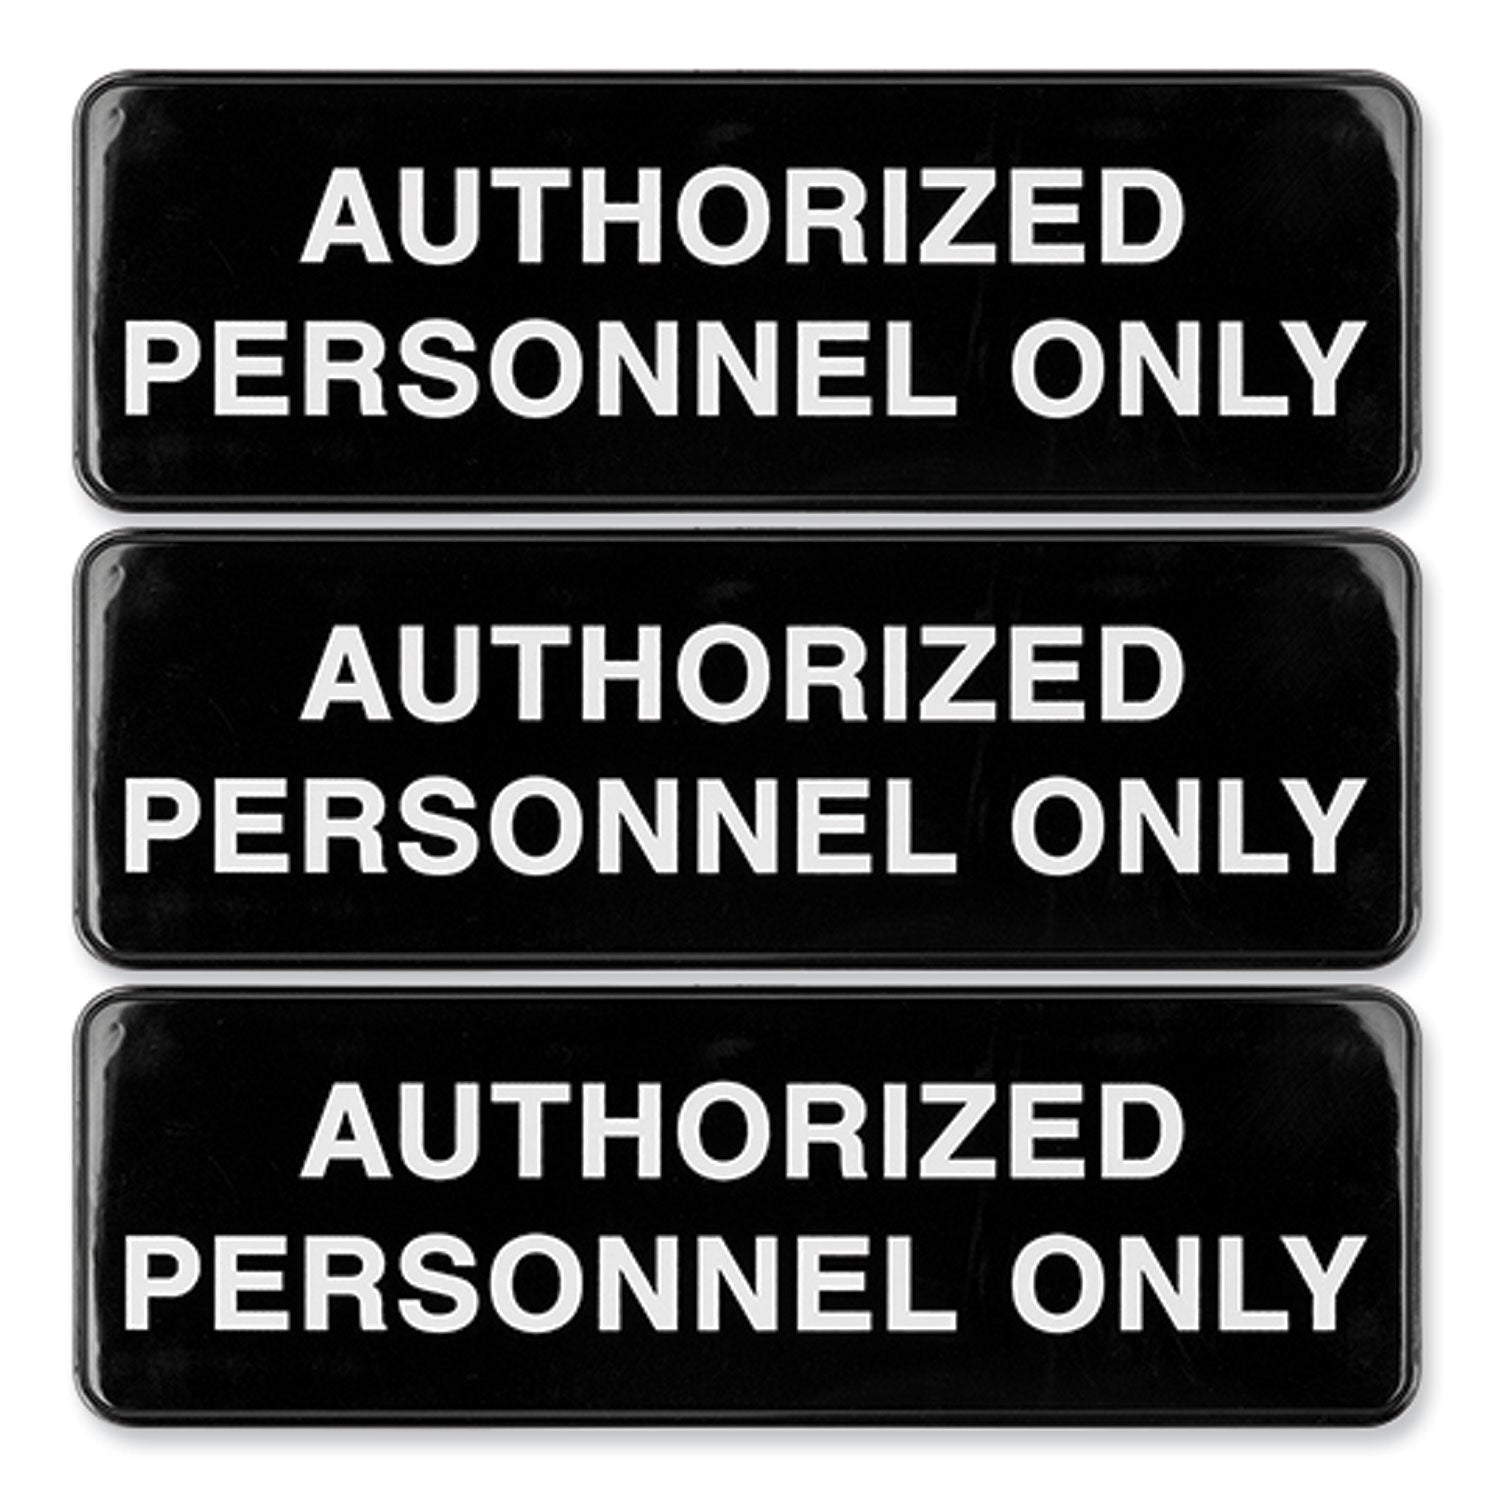 authorized-personnel-only-indoor-outdoor-wall-sign-9-x-3-black-face-white-graphics-3-pack_exohd0262s - 1